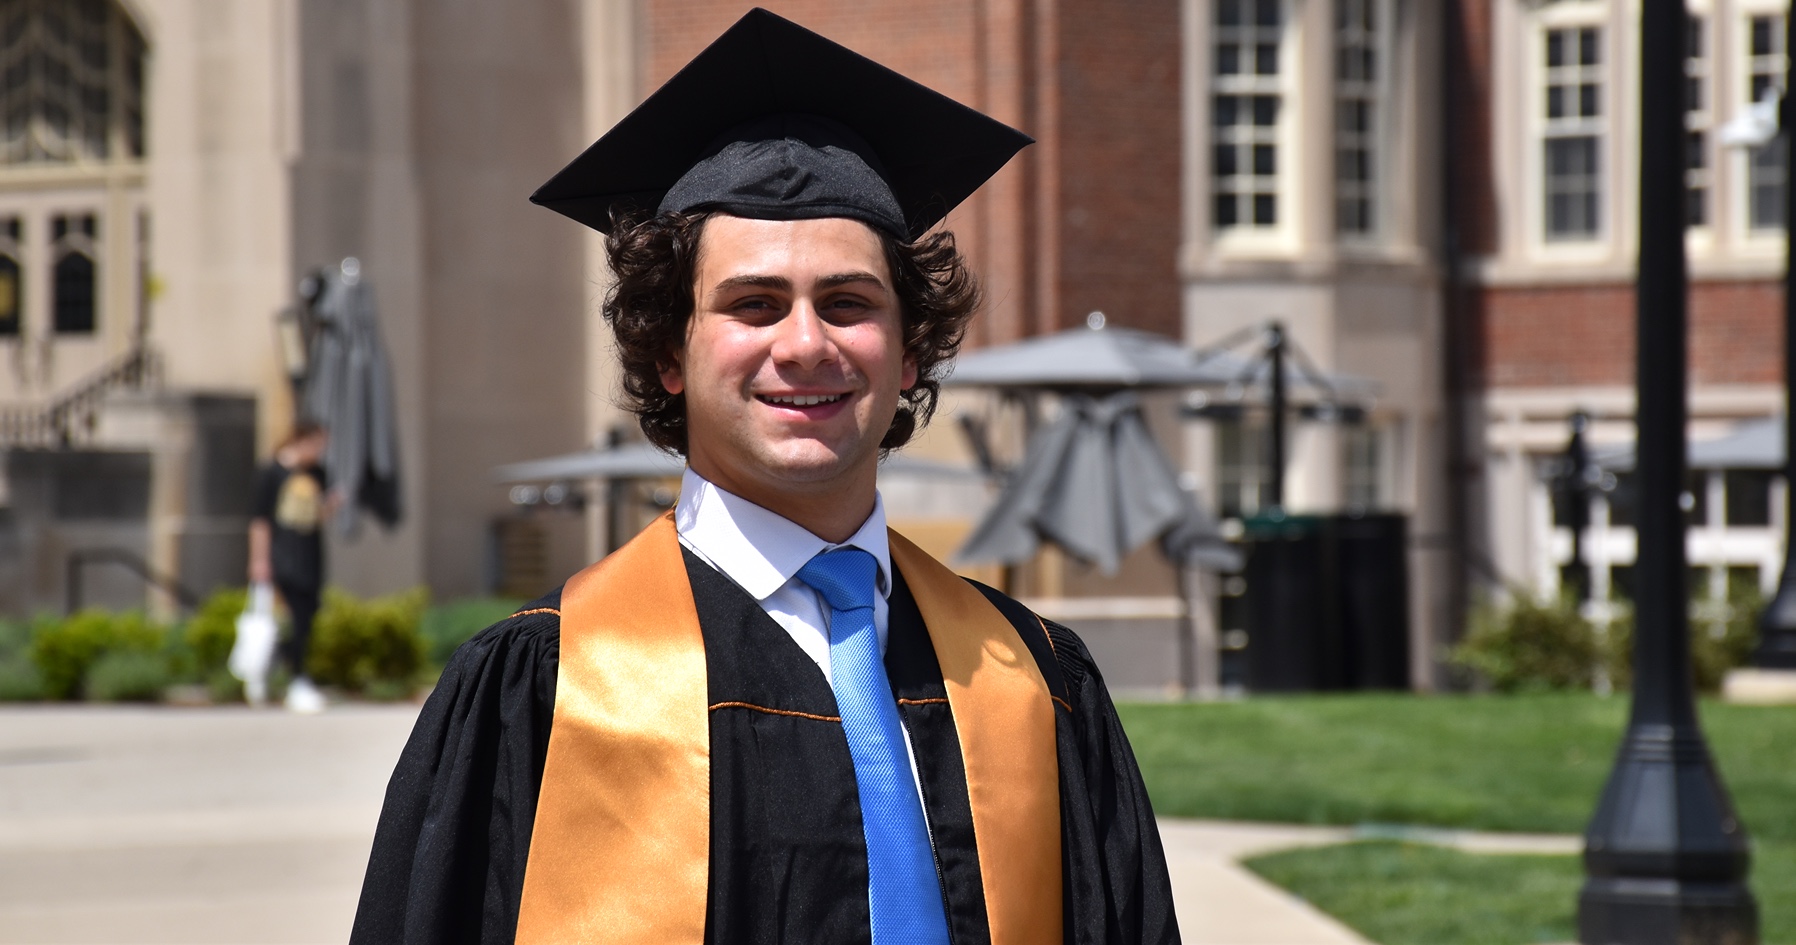 Remi Carrella stands in cap and gown at Purdue University in front of the union